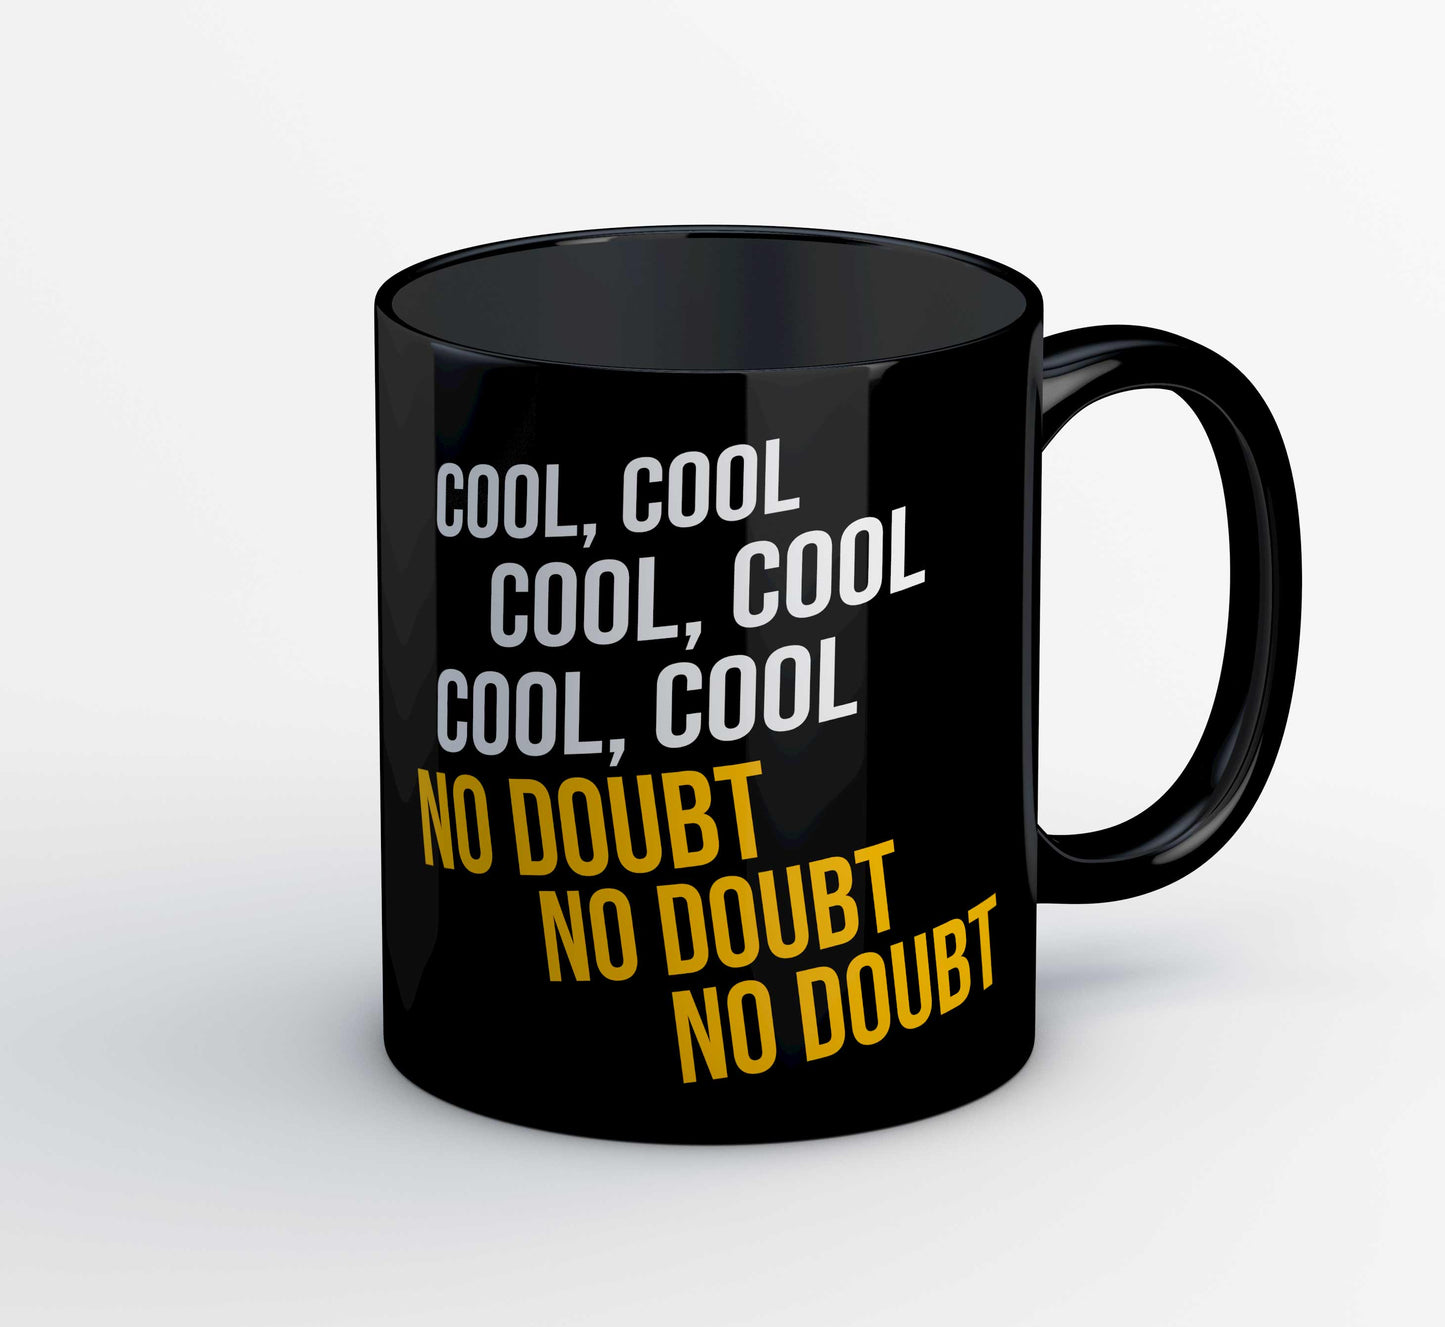 brooklyn nine-nine cool cool cool no doubt no doubt no doubt mug coffee ceramic buy online india the banyan tee tbt men women girls boys unisex  detective jake peralta terry charles boyle gina linetti andy samberg merchandise clothing acceessories